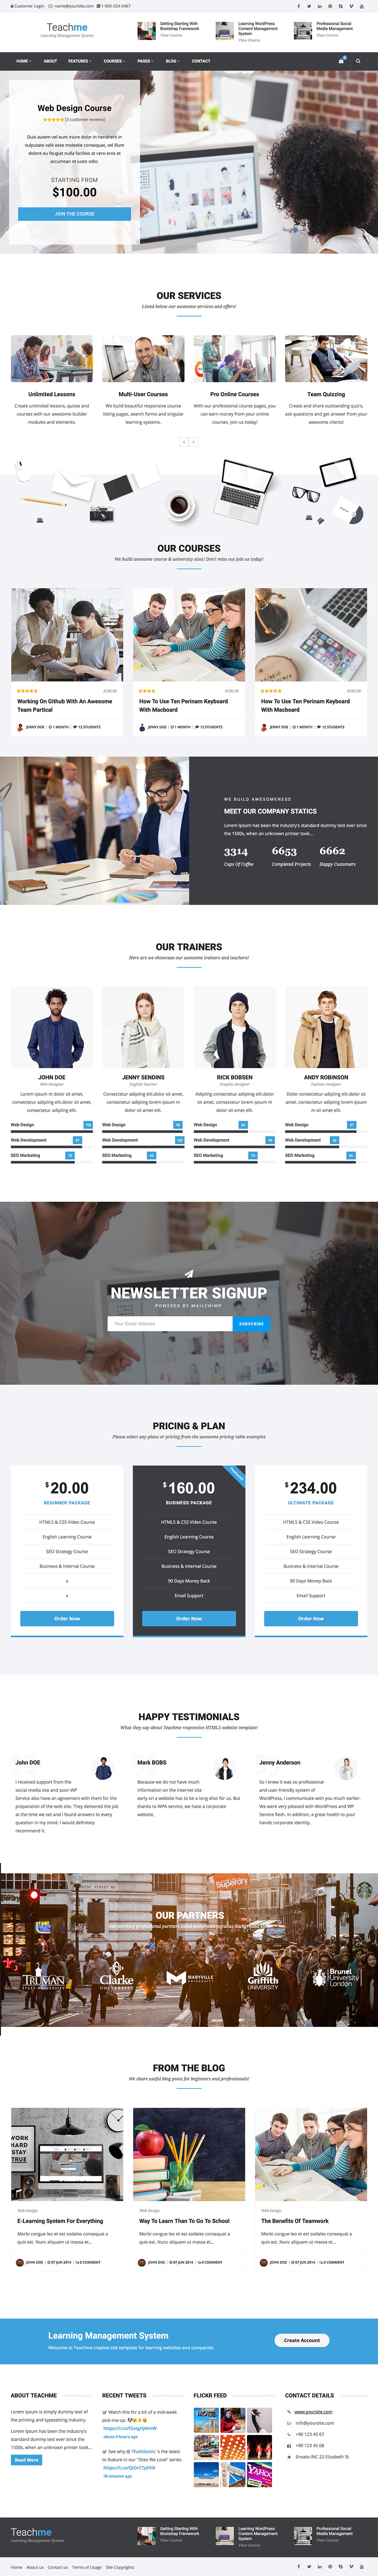 Teachme - Learning Management System WordPress Theme